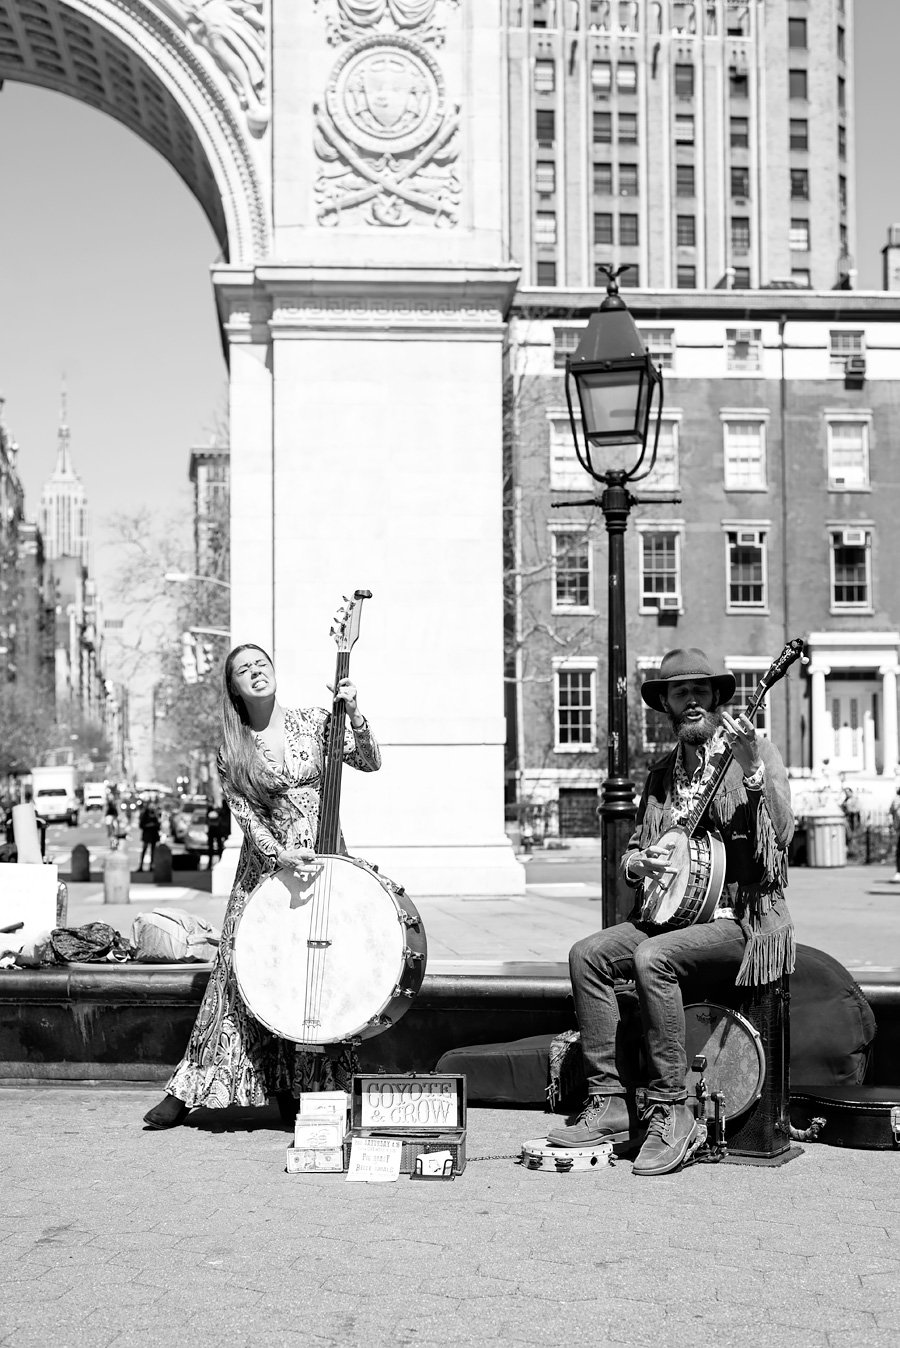 Coyote & Crow performing in Washington Square Park in New York. More New York moments in black & white on Urban Pixxels: http://urbanpixxels.com/new-york-bw 